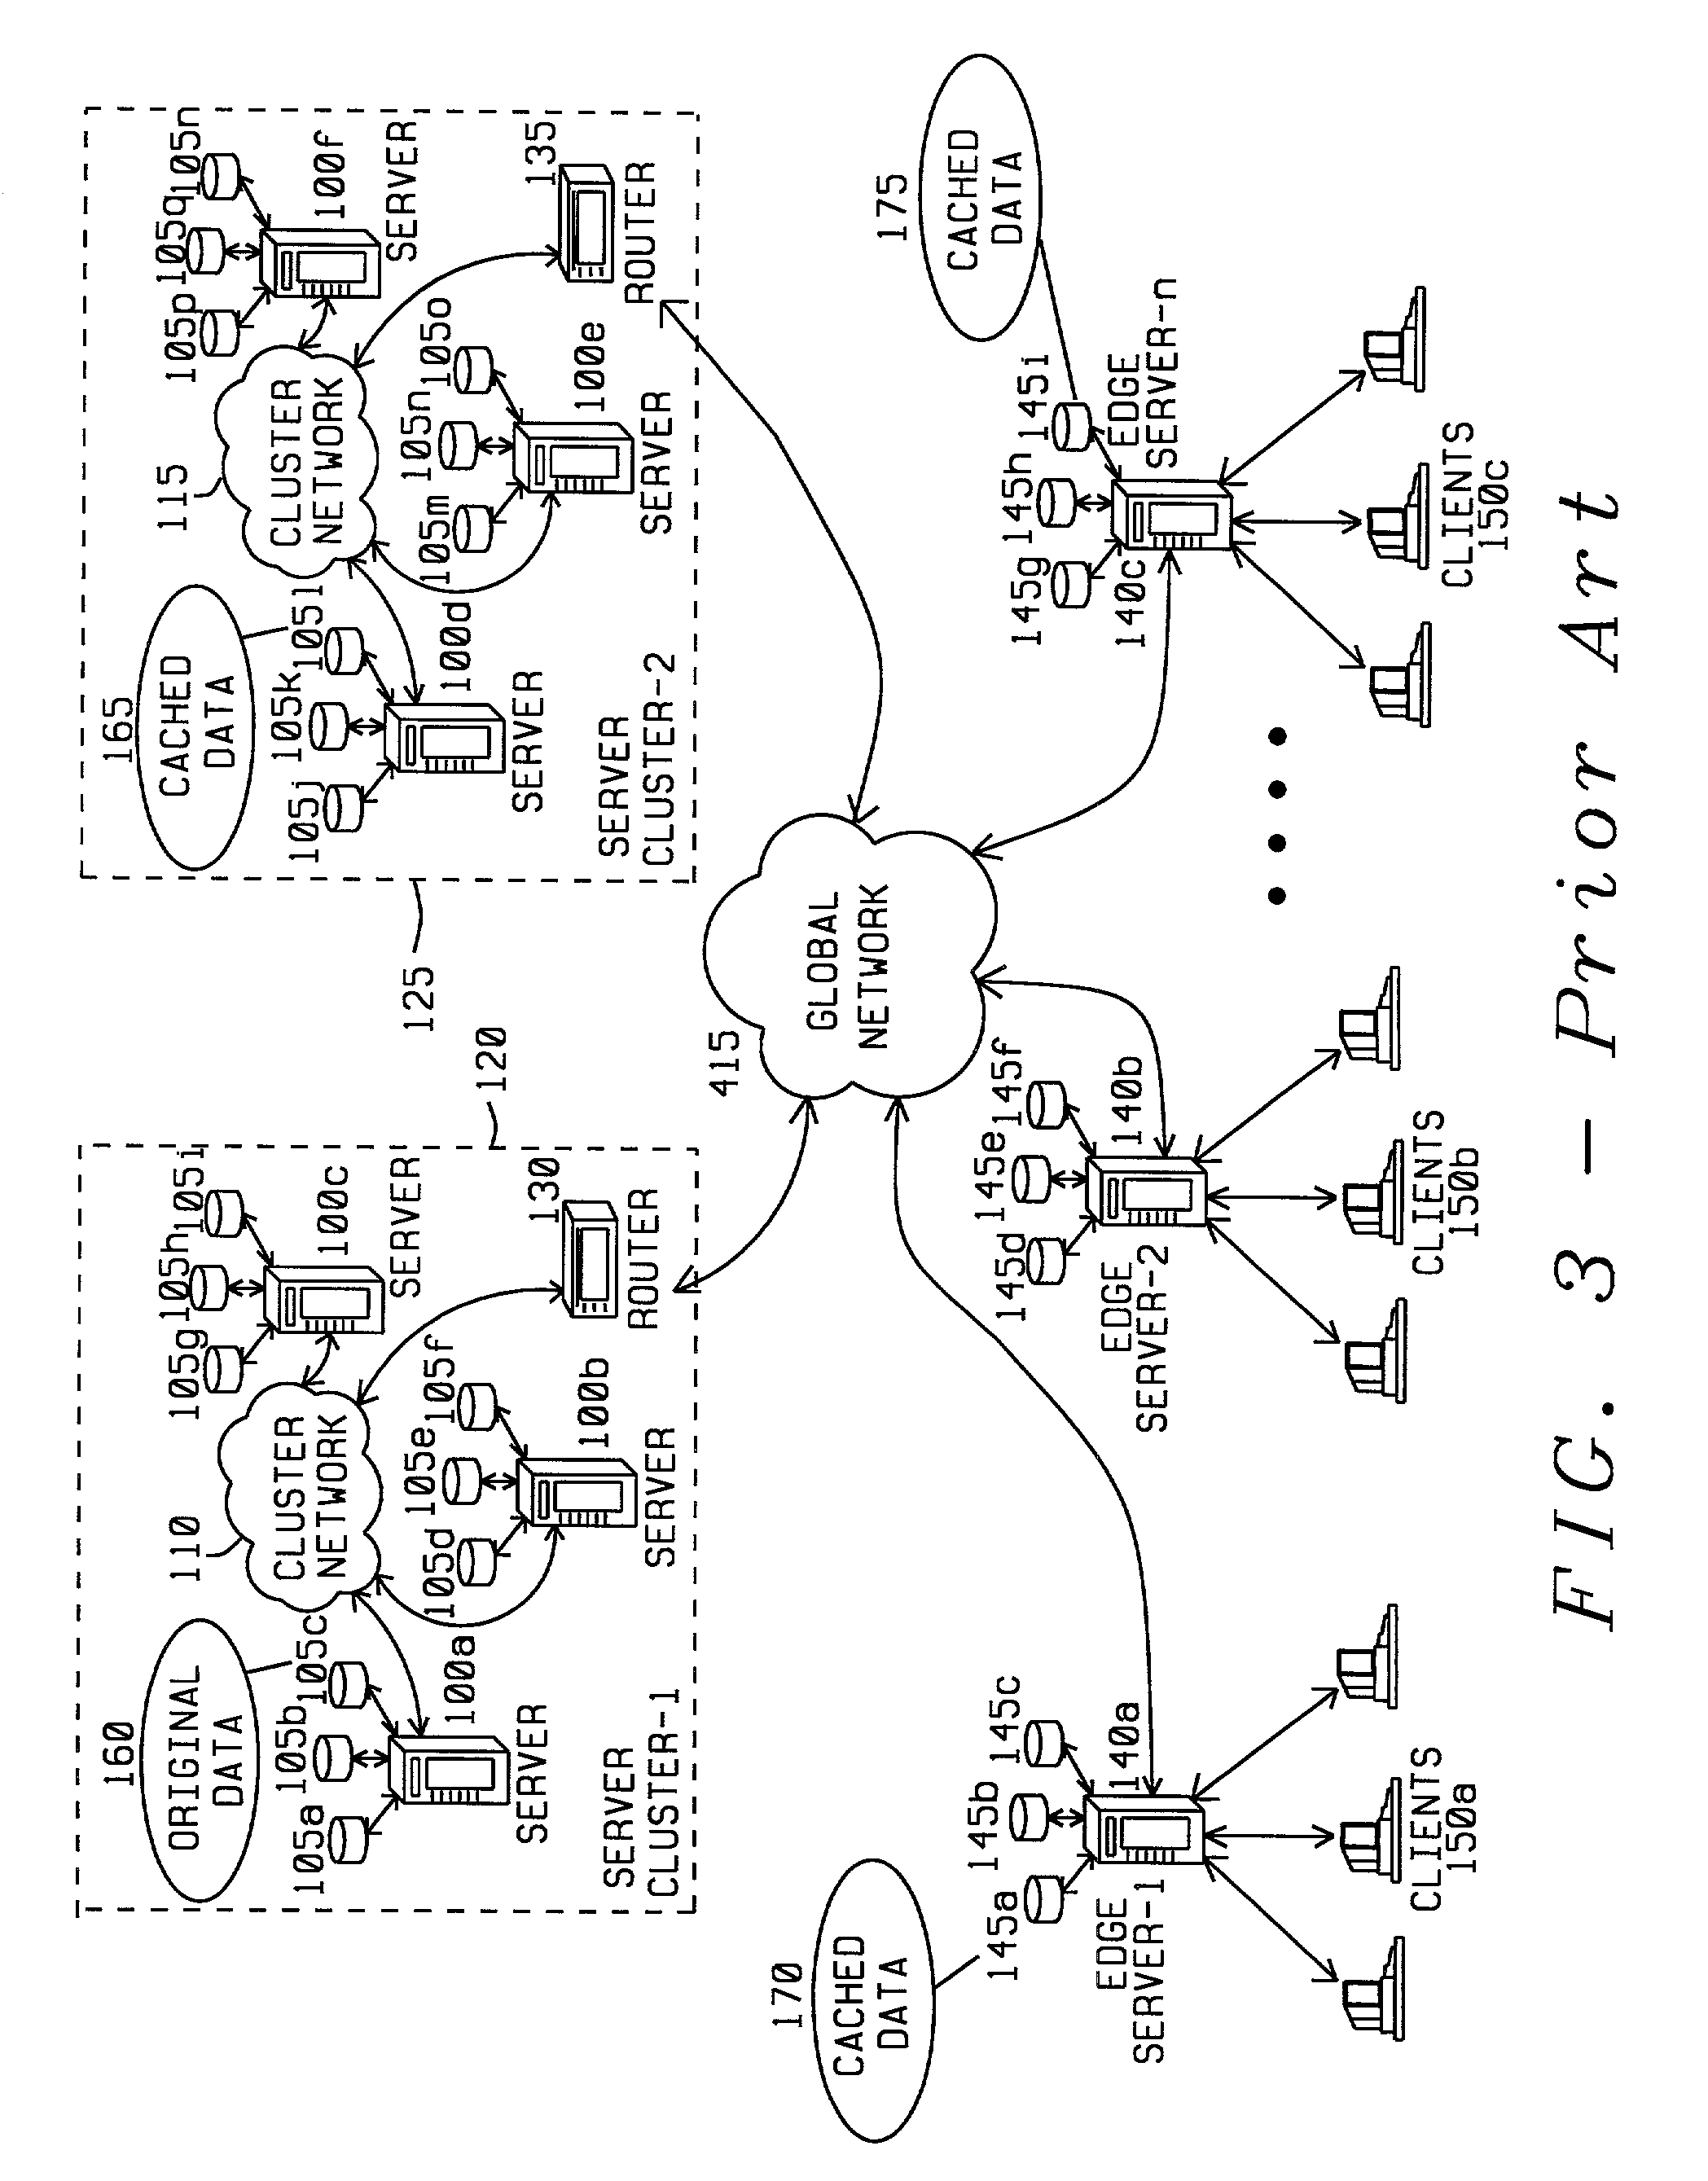 Video distribution system using disk load balancing by file copying